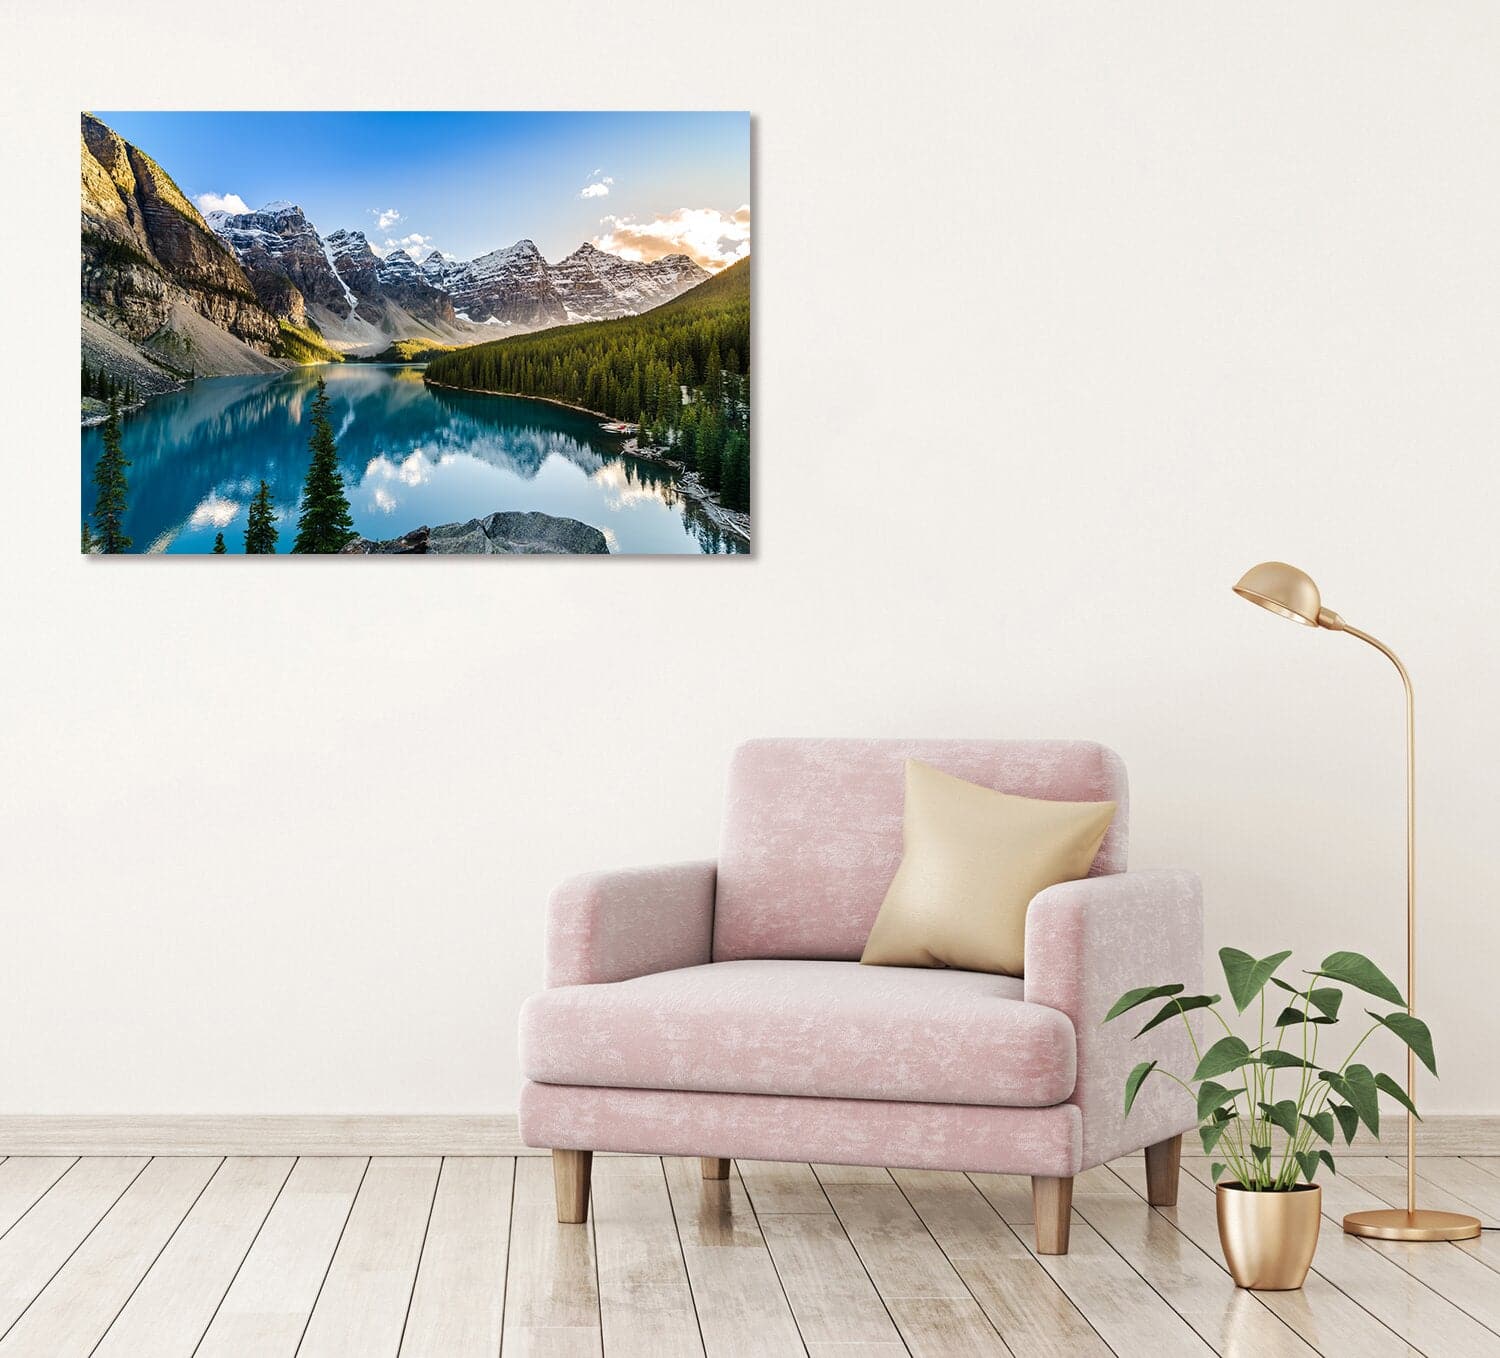 Framed 1 Panel - Scenic view of Moraine lake and mountain range at sunset